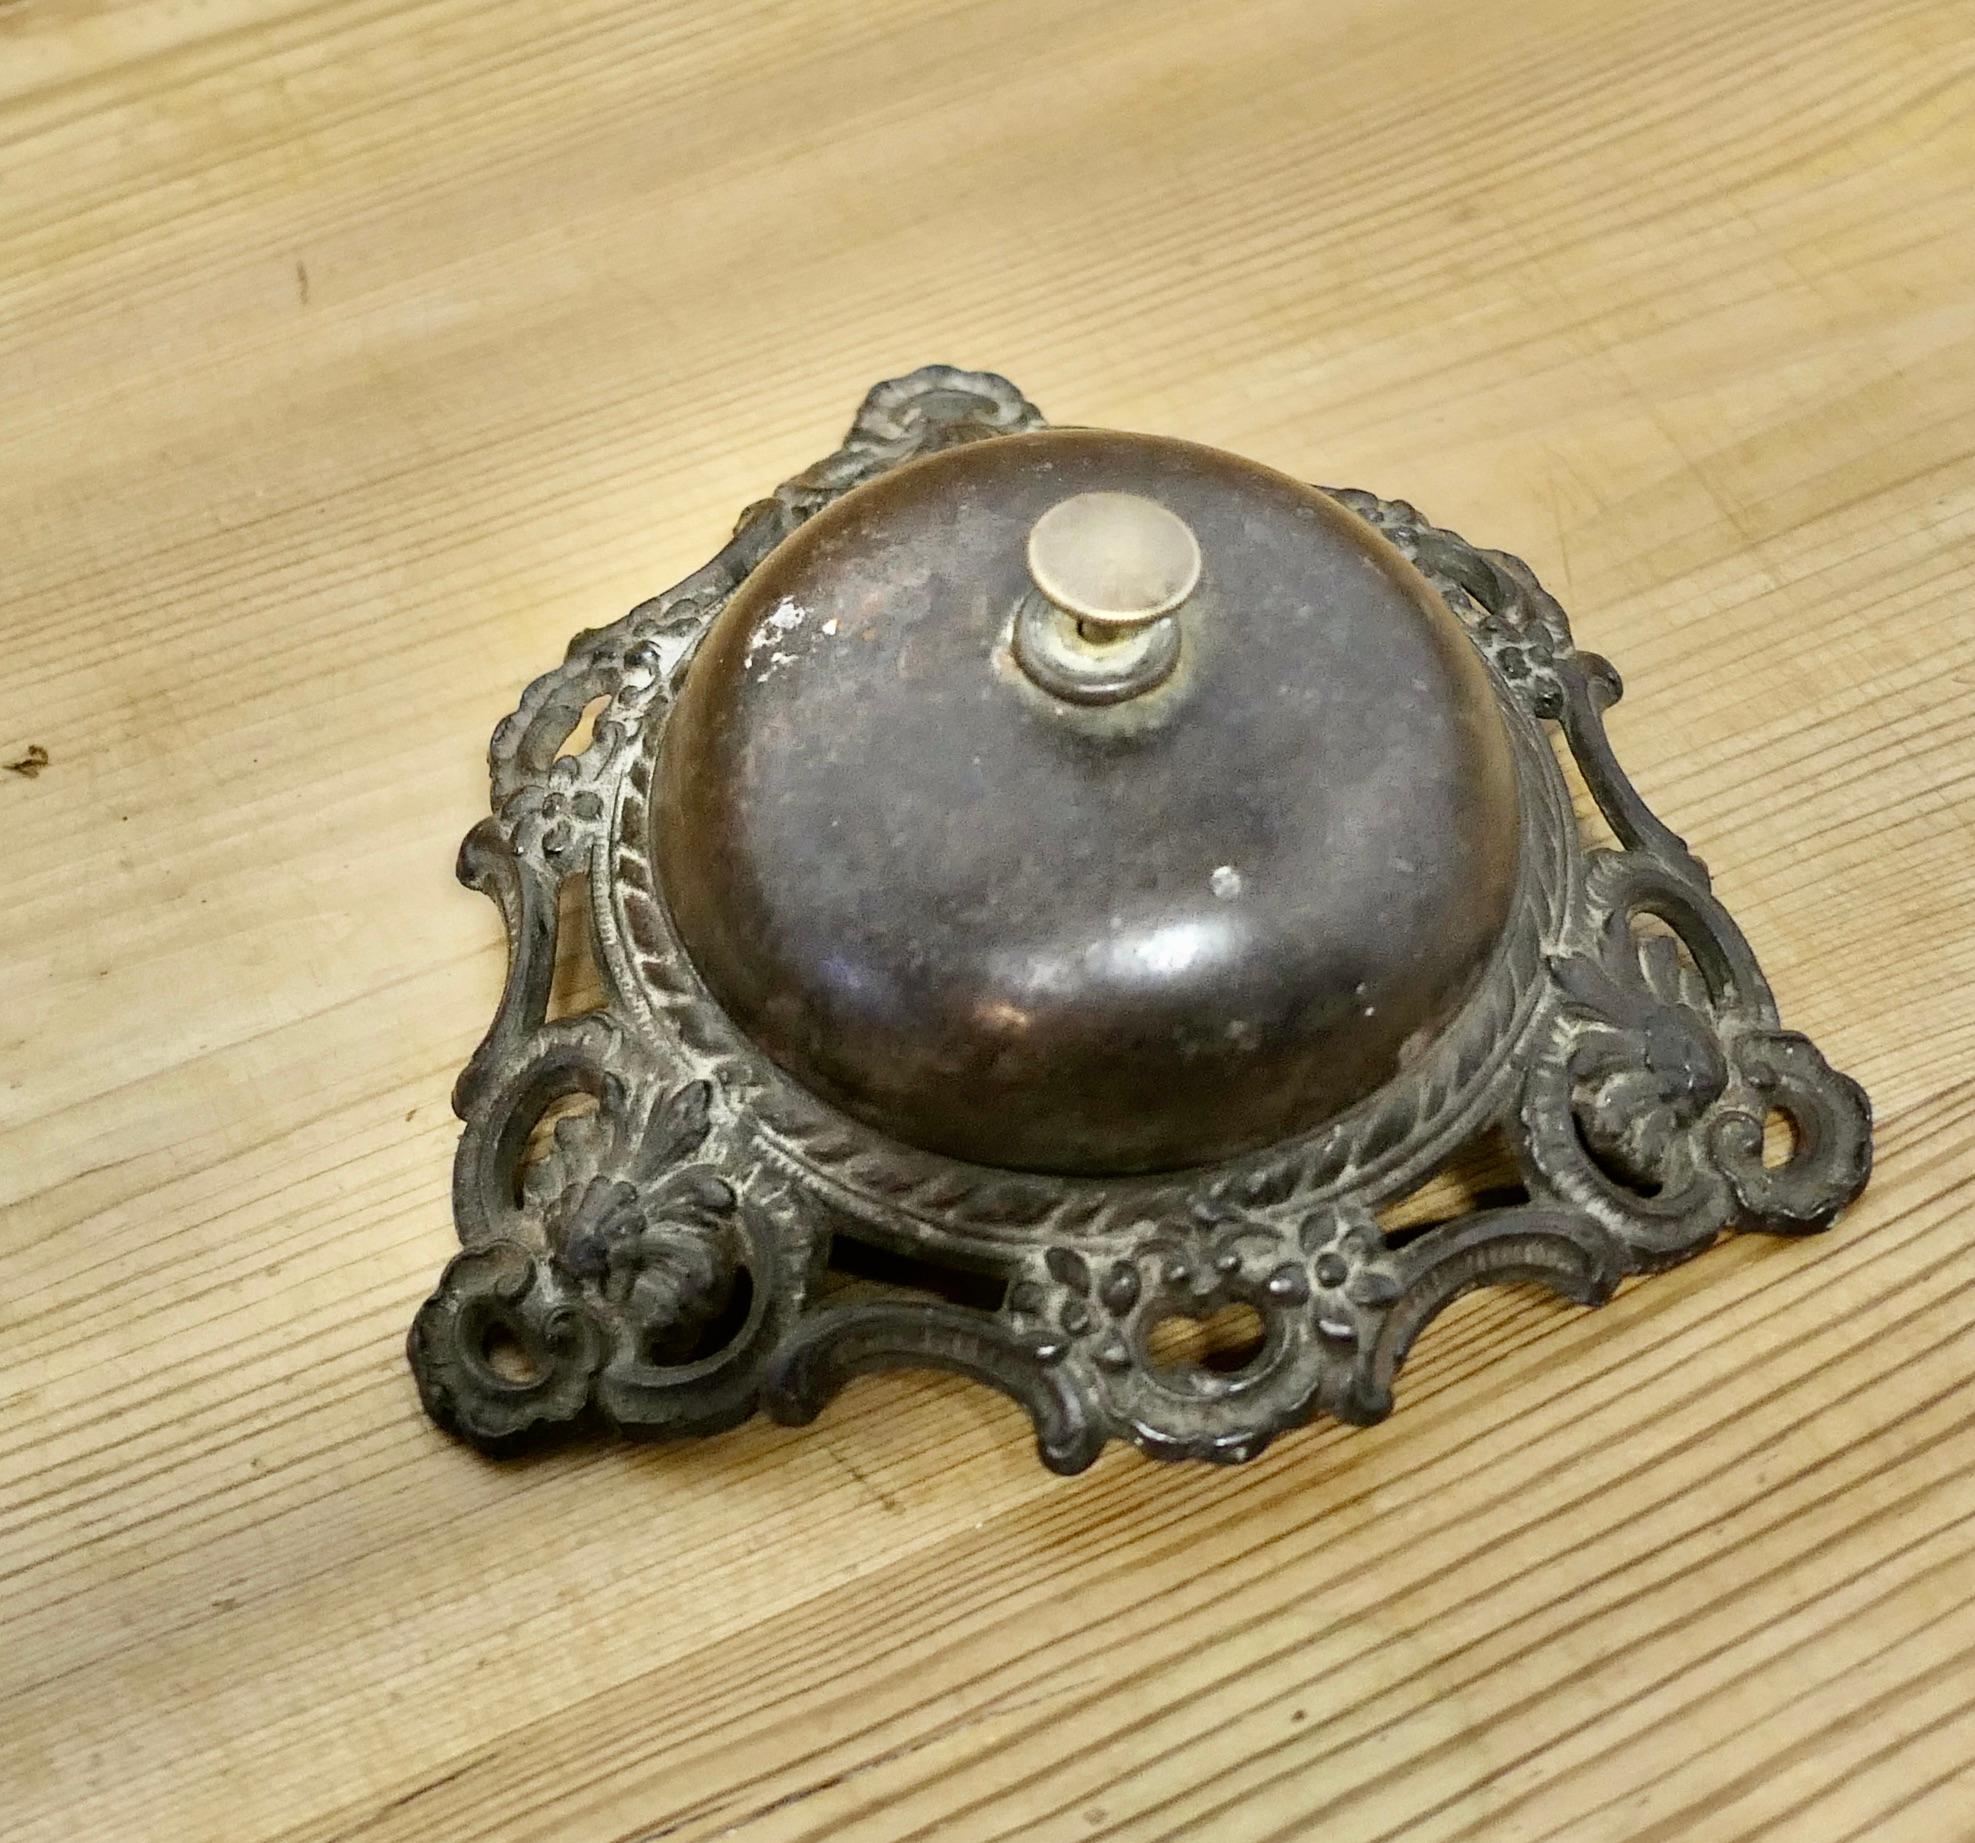 Victorian Decorative Iron Courtesy Counter Top Bell, Reception Desk Bell

Made and cast in iron, in good condition and ready to use with a demanding ding, the bell is 6” in diameter and 3” high 
VY193 